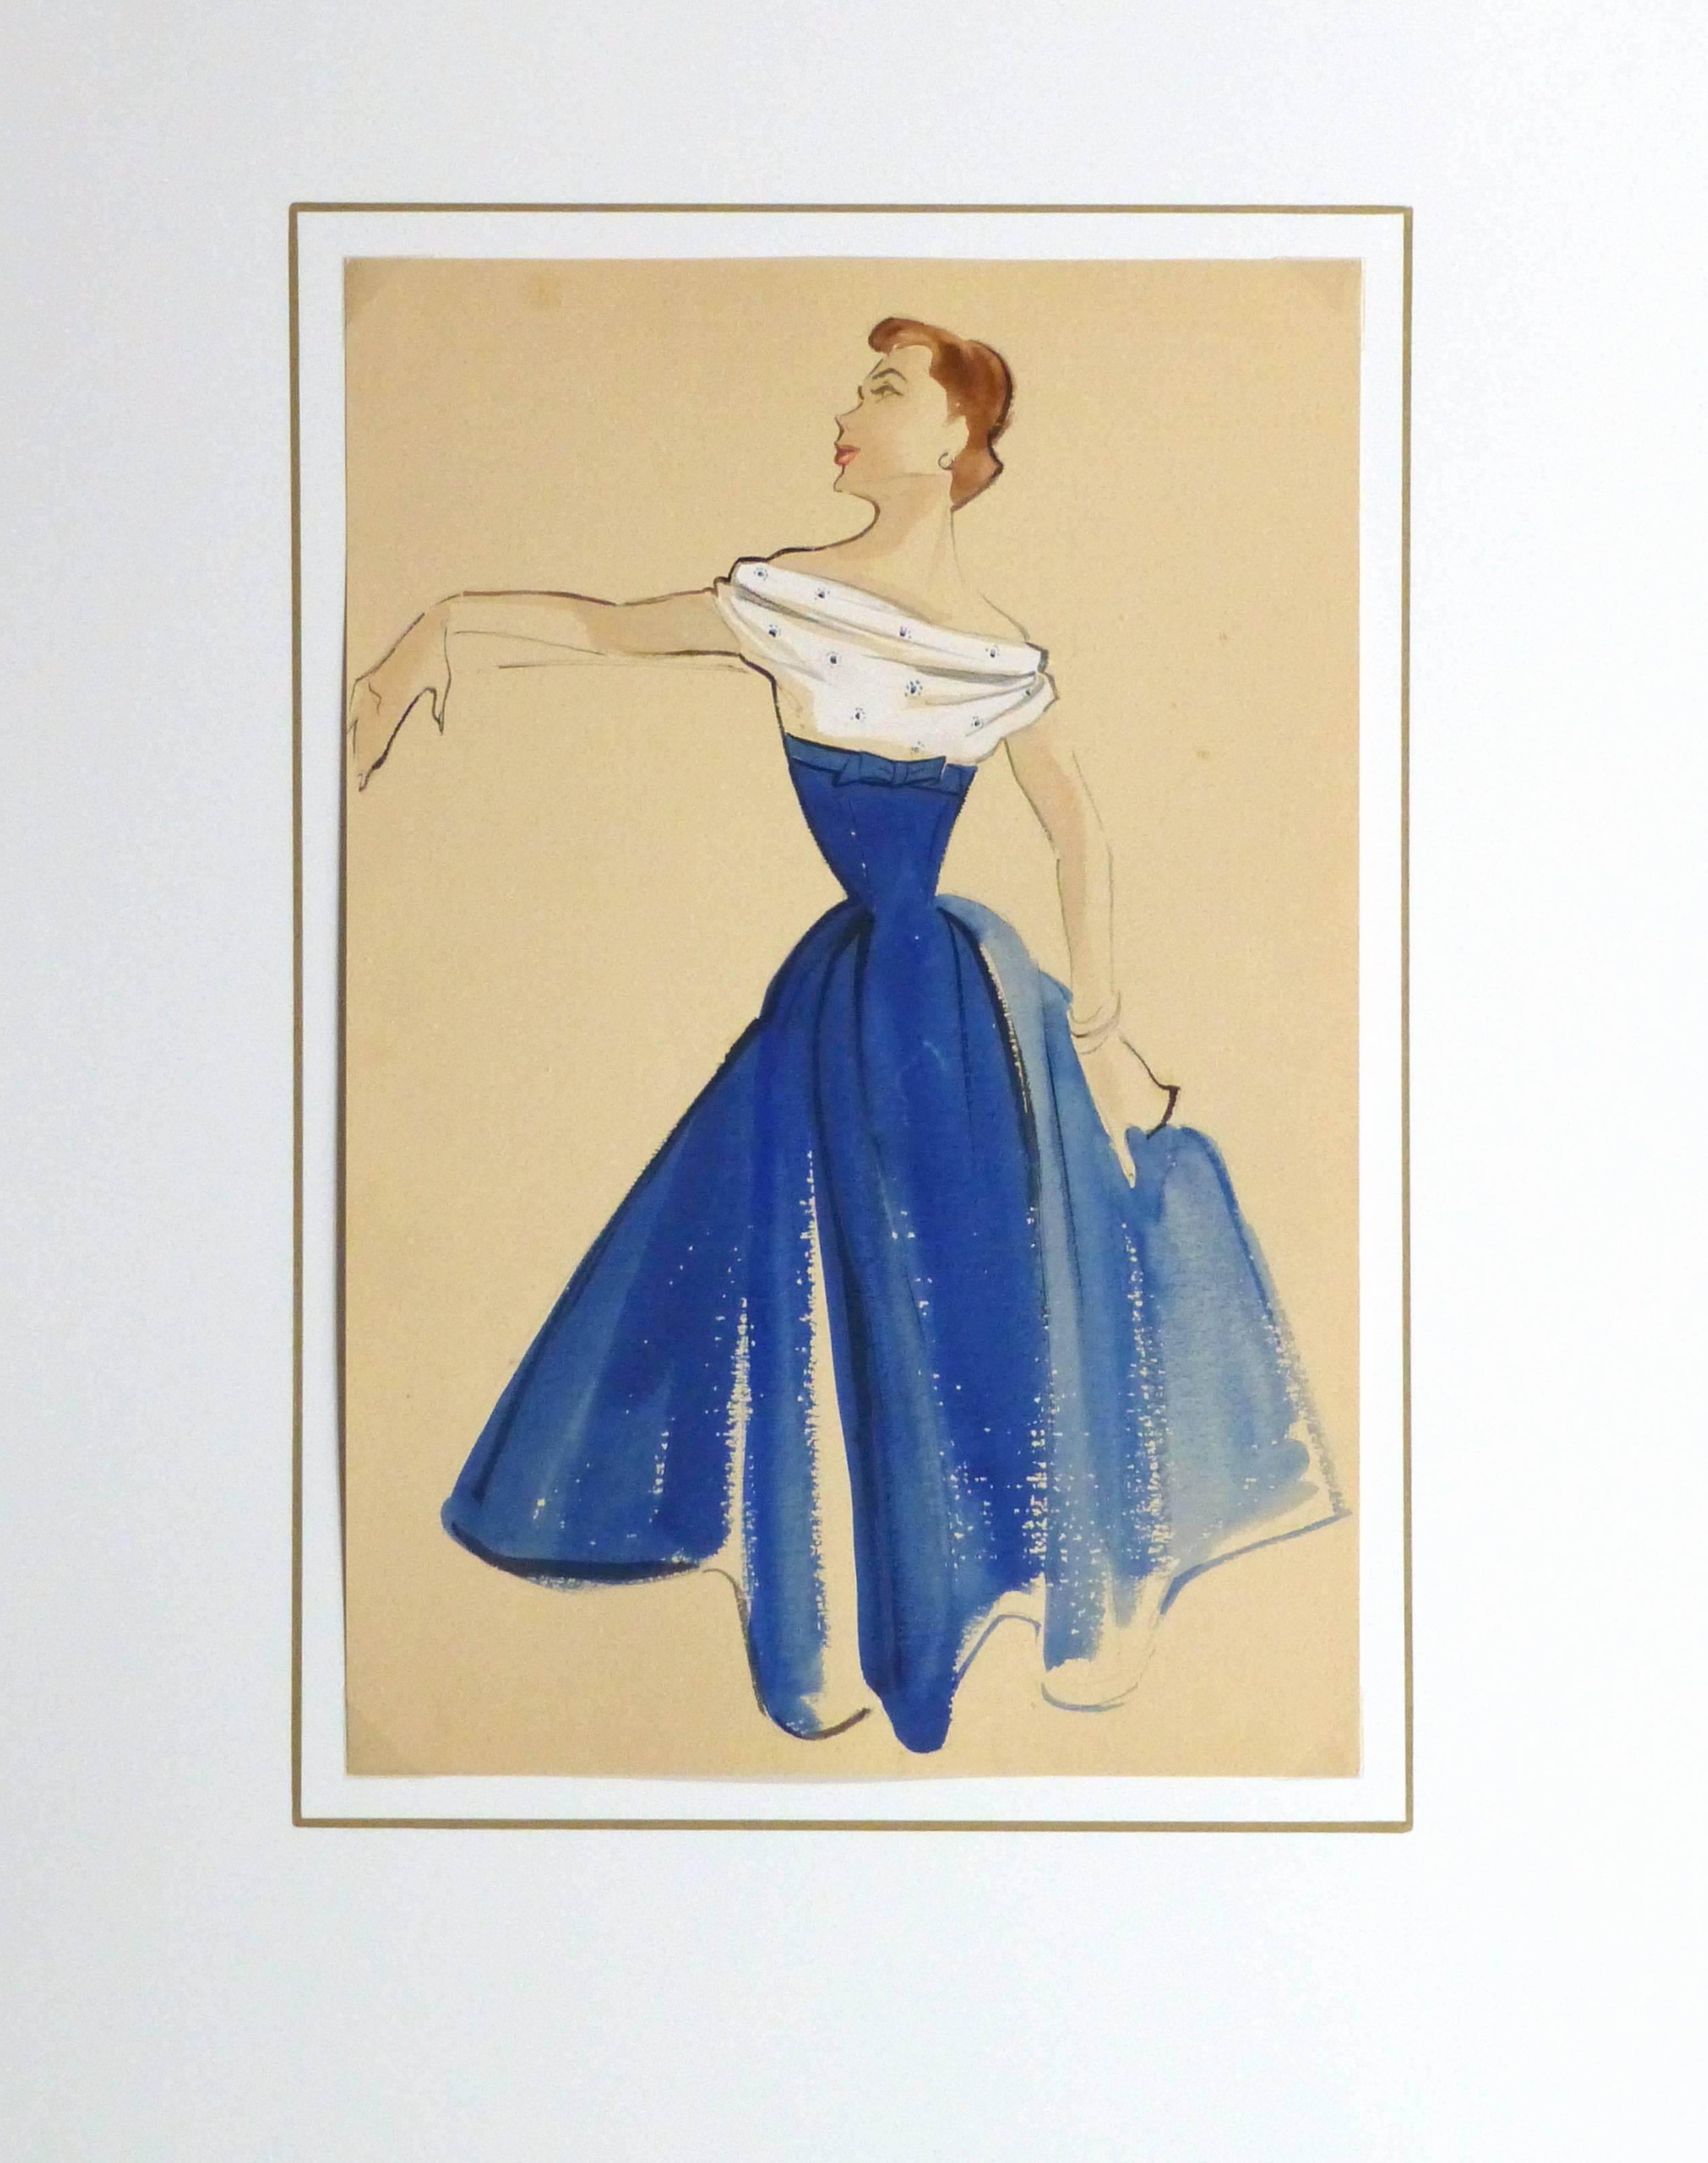 Vintage Gouache Fashion Sketch -  Blue and White Dress - Beige Figurative Art by Unknown